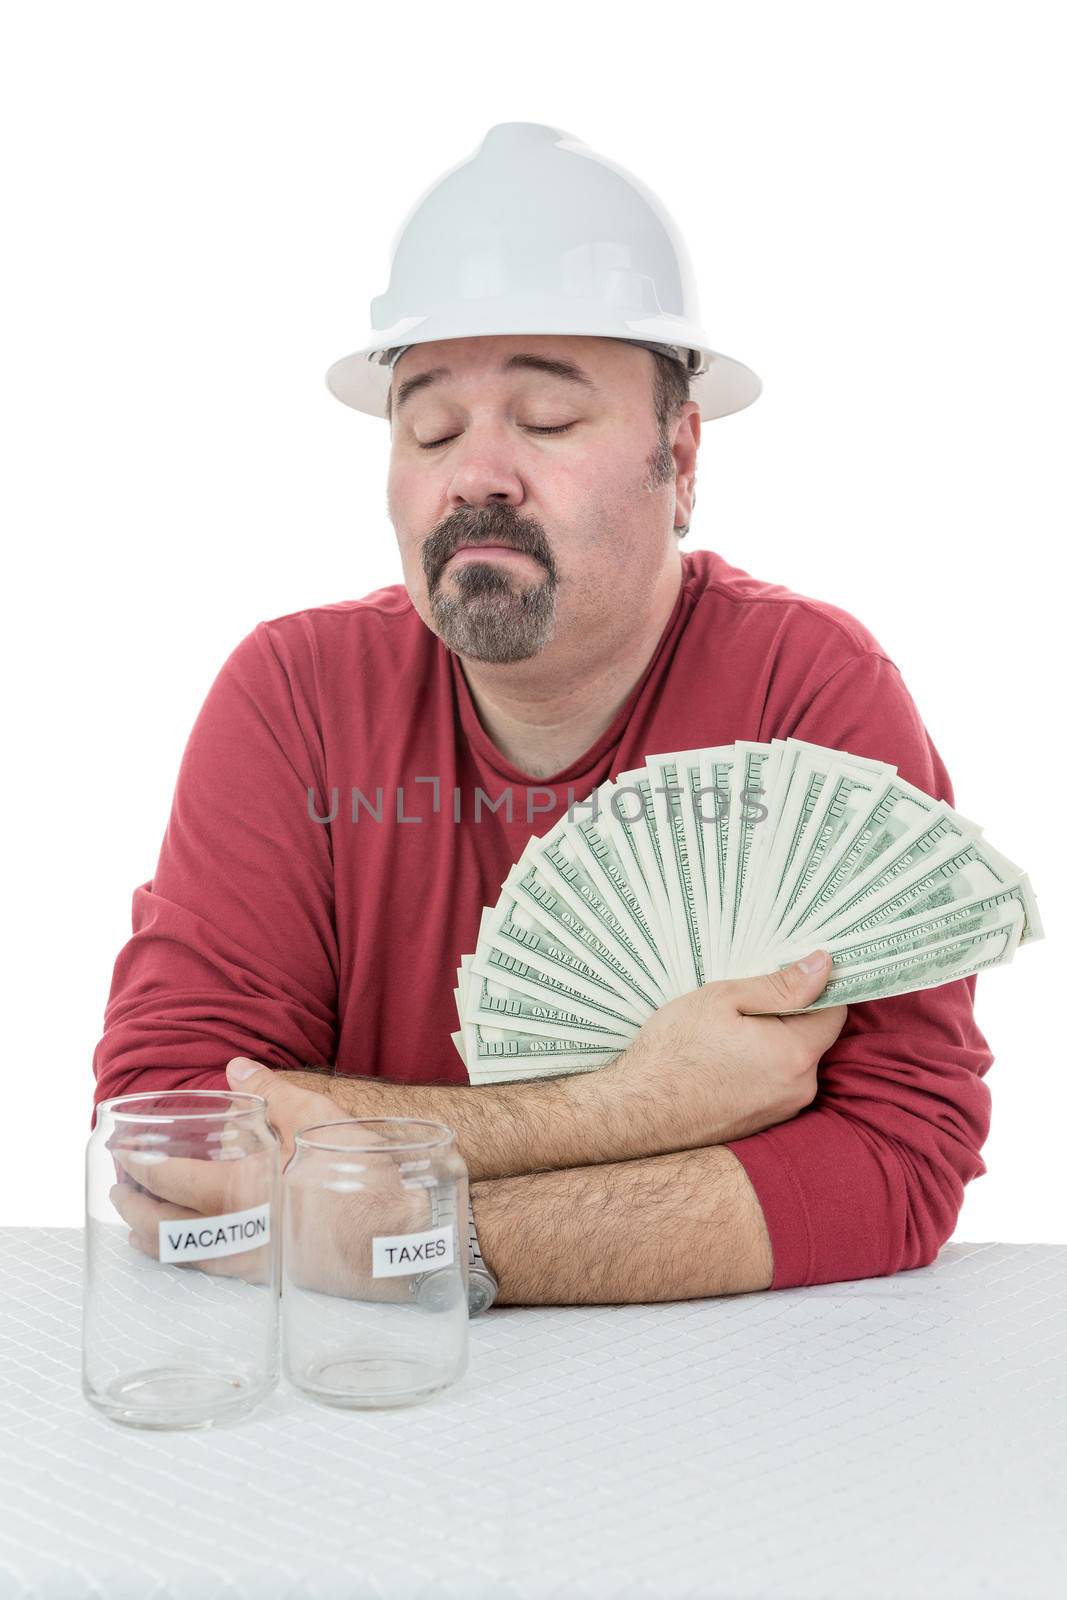 Construction worker deciding if the money will be used to pay tax obligations or used for personal vacations